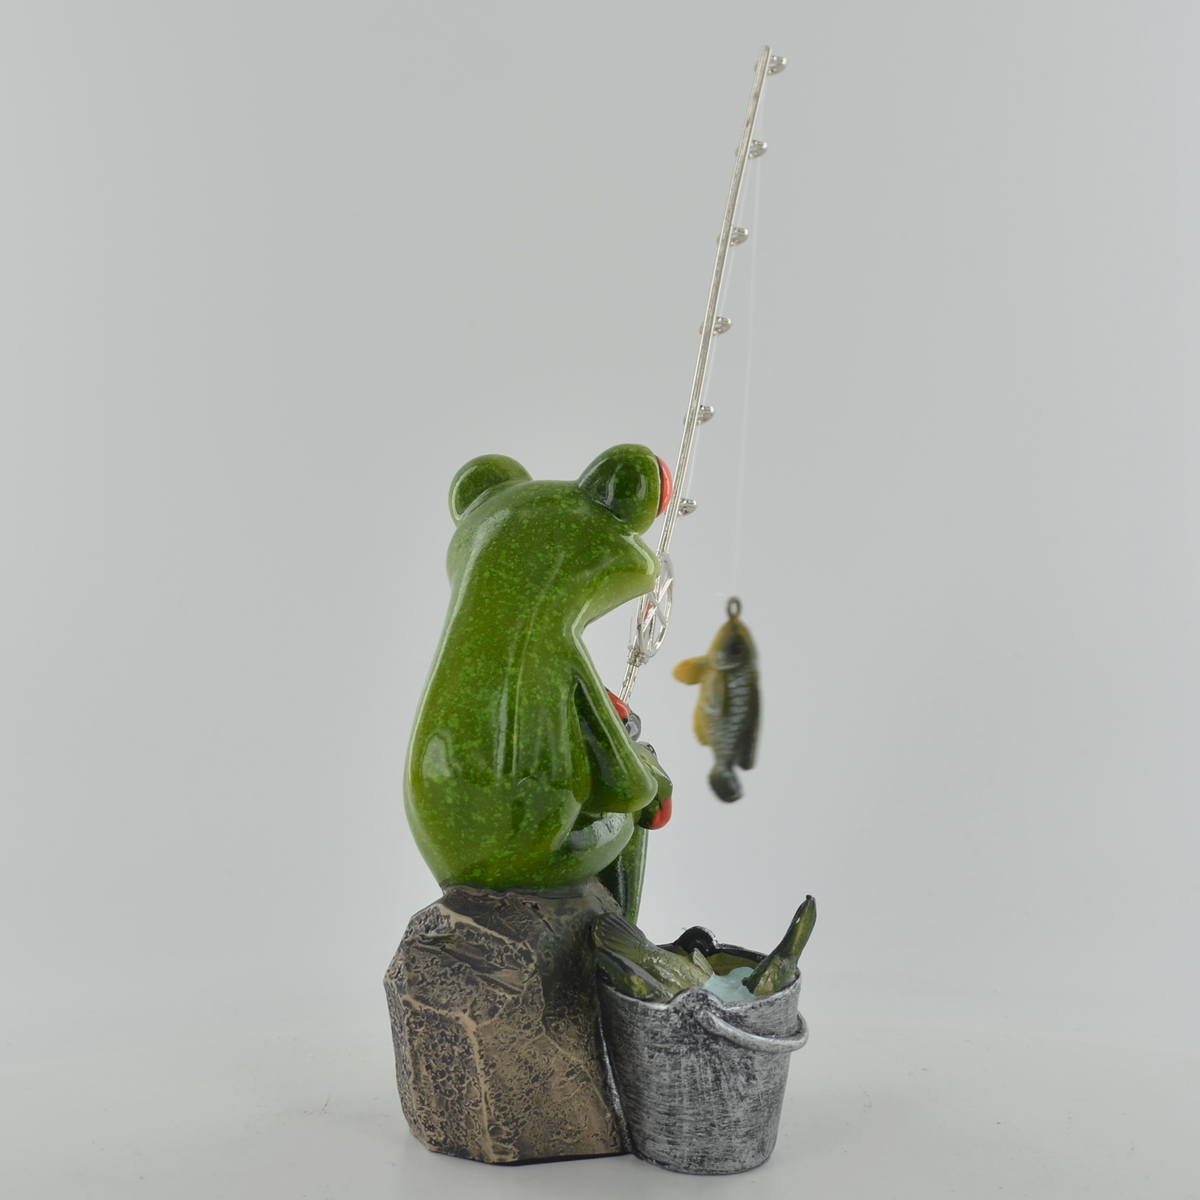 Comical Frog Ornament - Reel them in